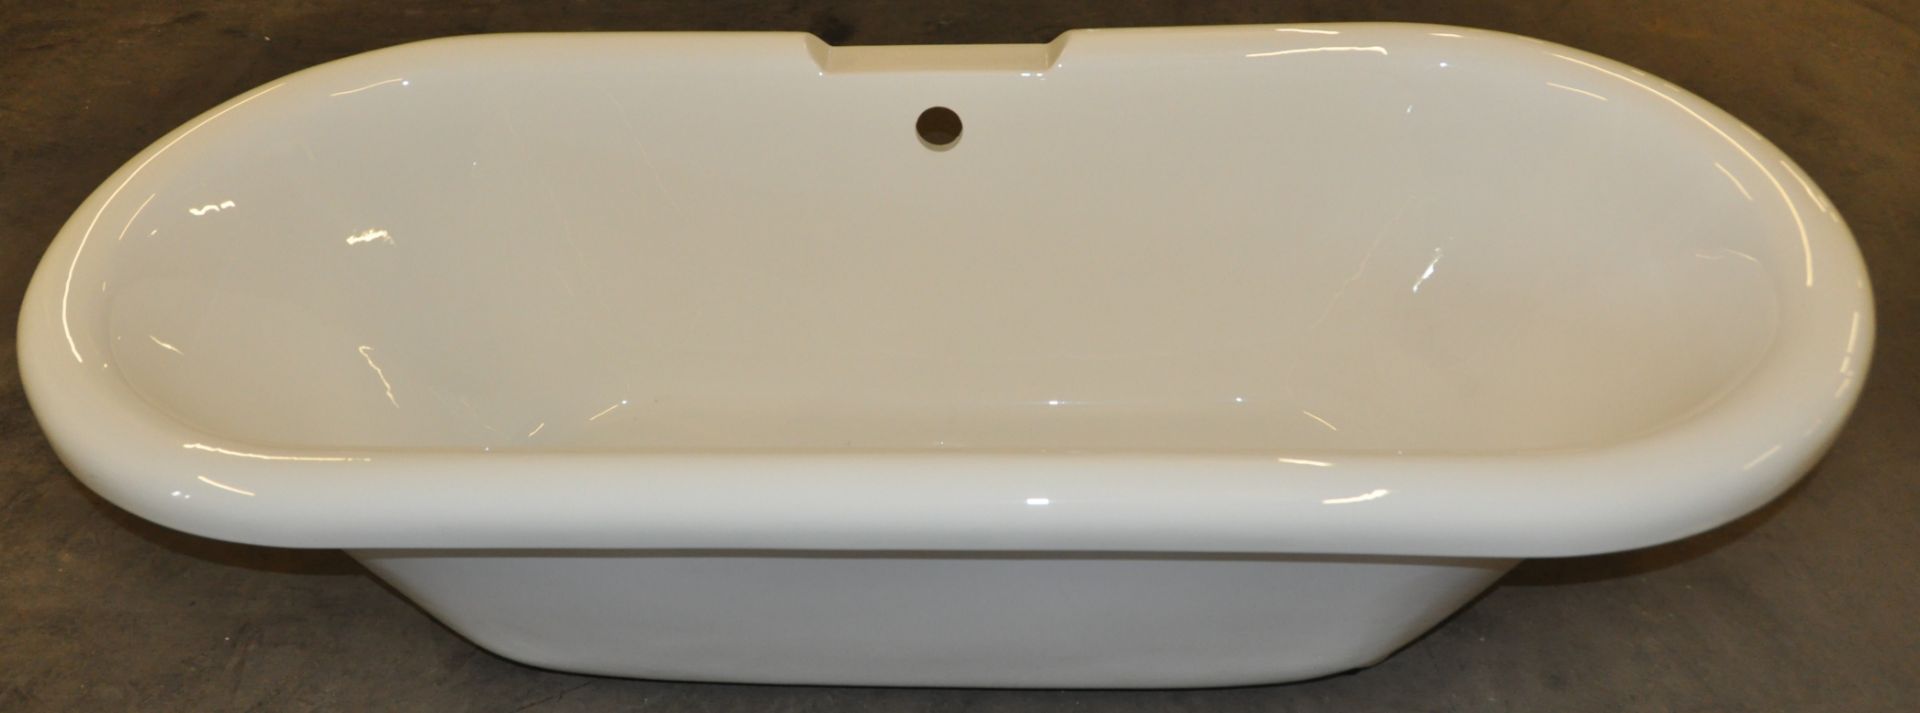 1 x Freestanding Roll Top Bath - With Central Waste and Tap Section - CL022 - Location: Bolton BL1 -